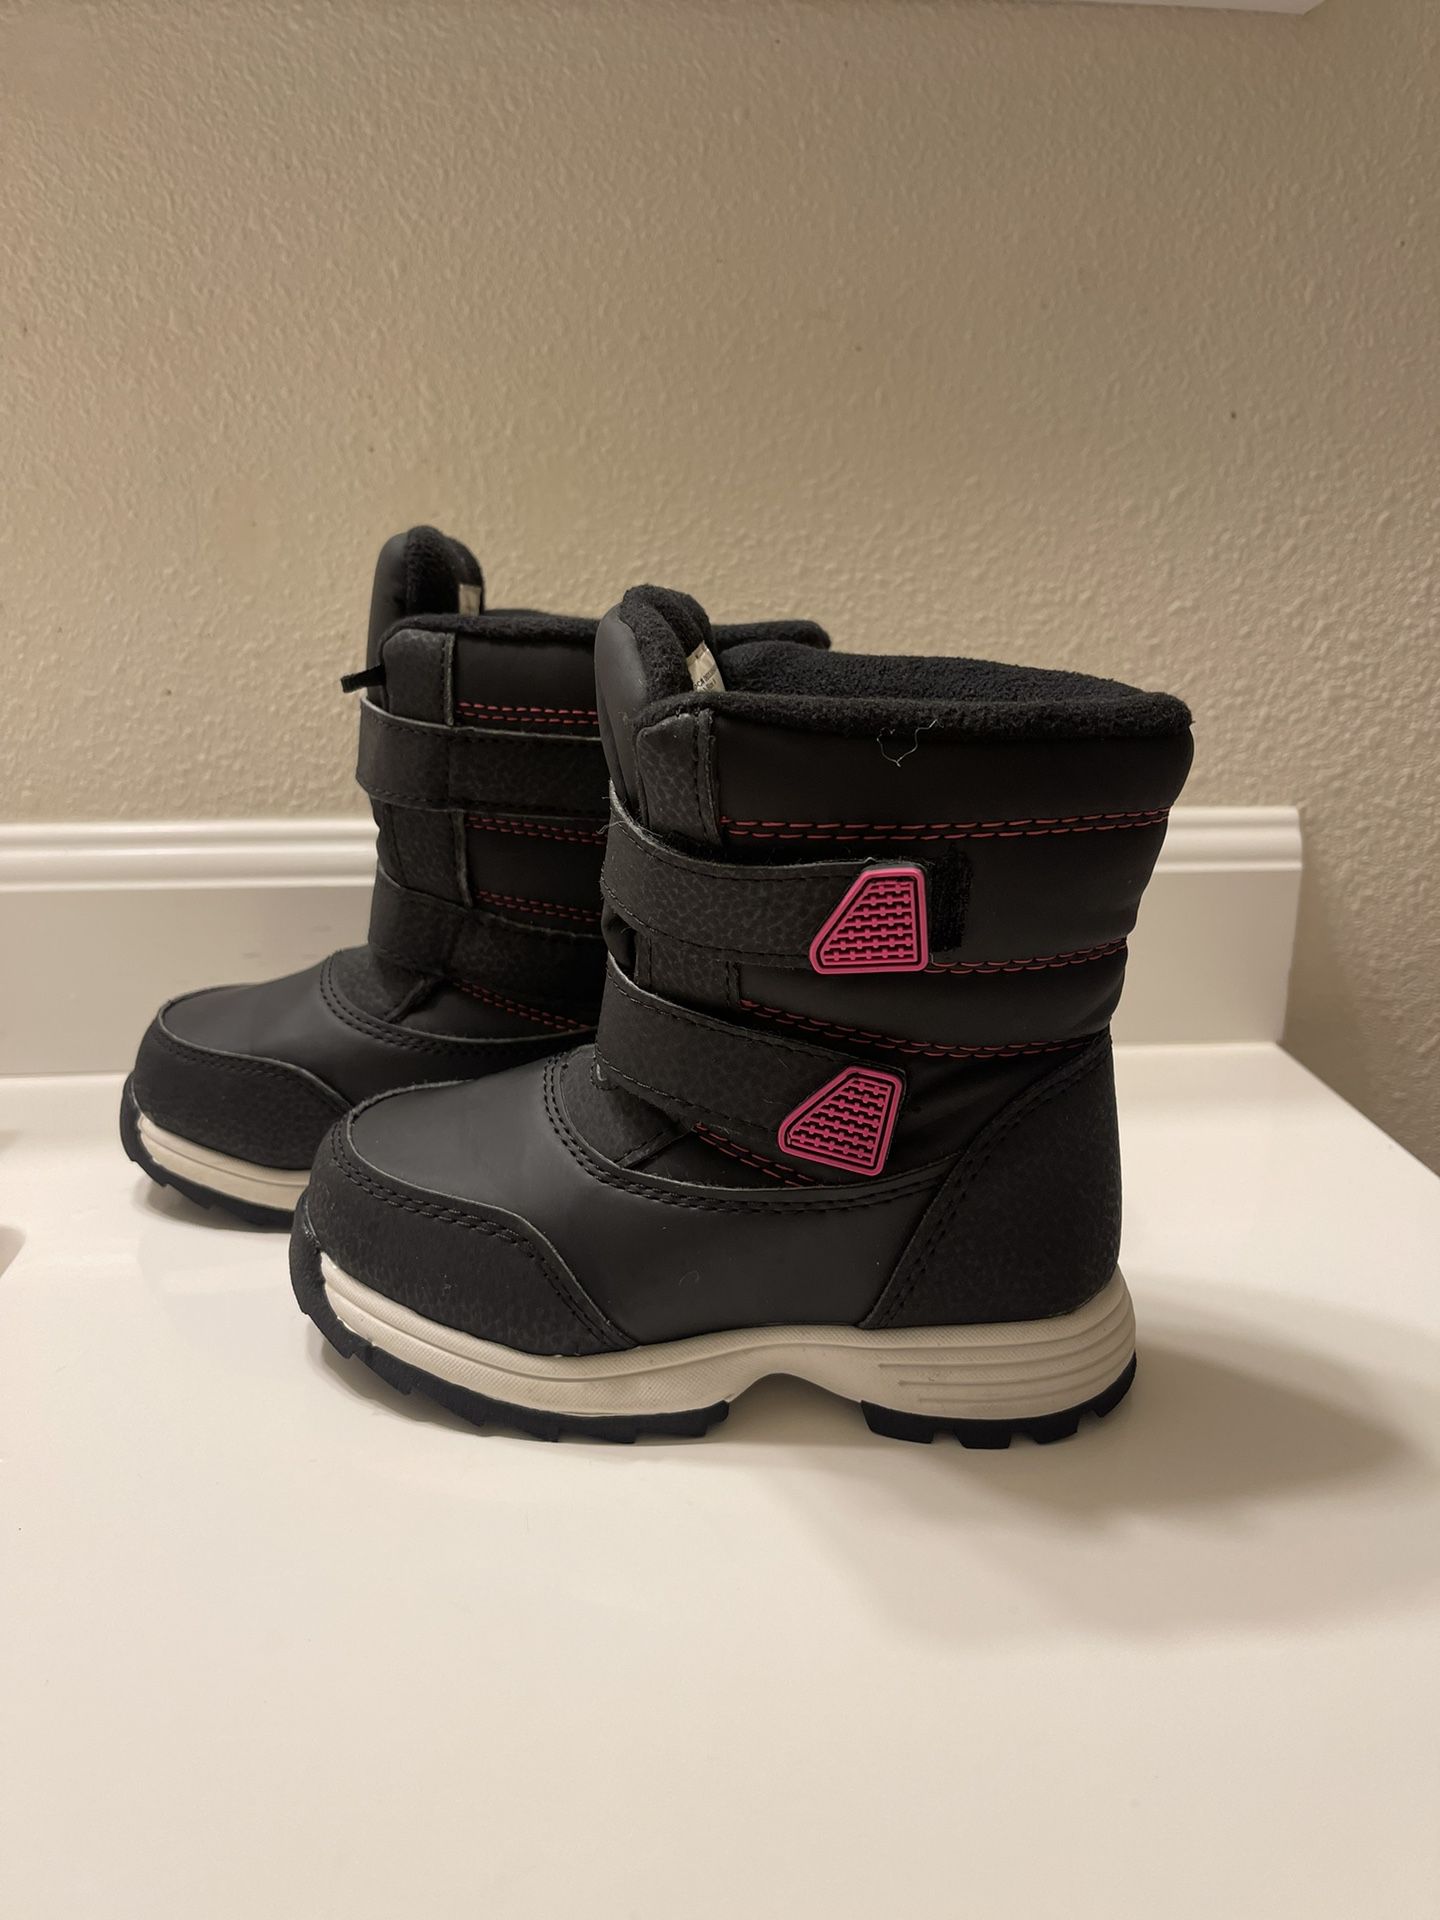 Girl’s Snow Boots 